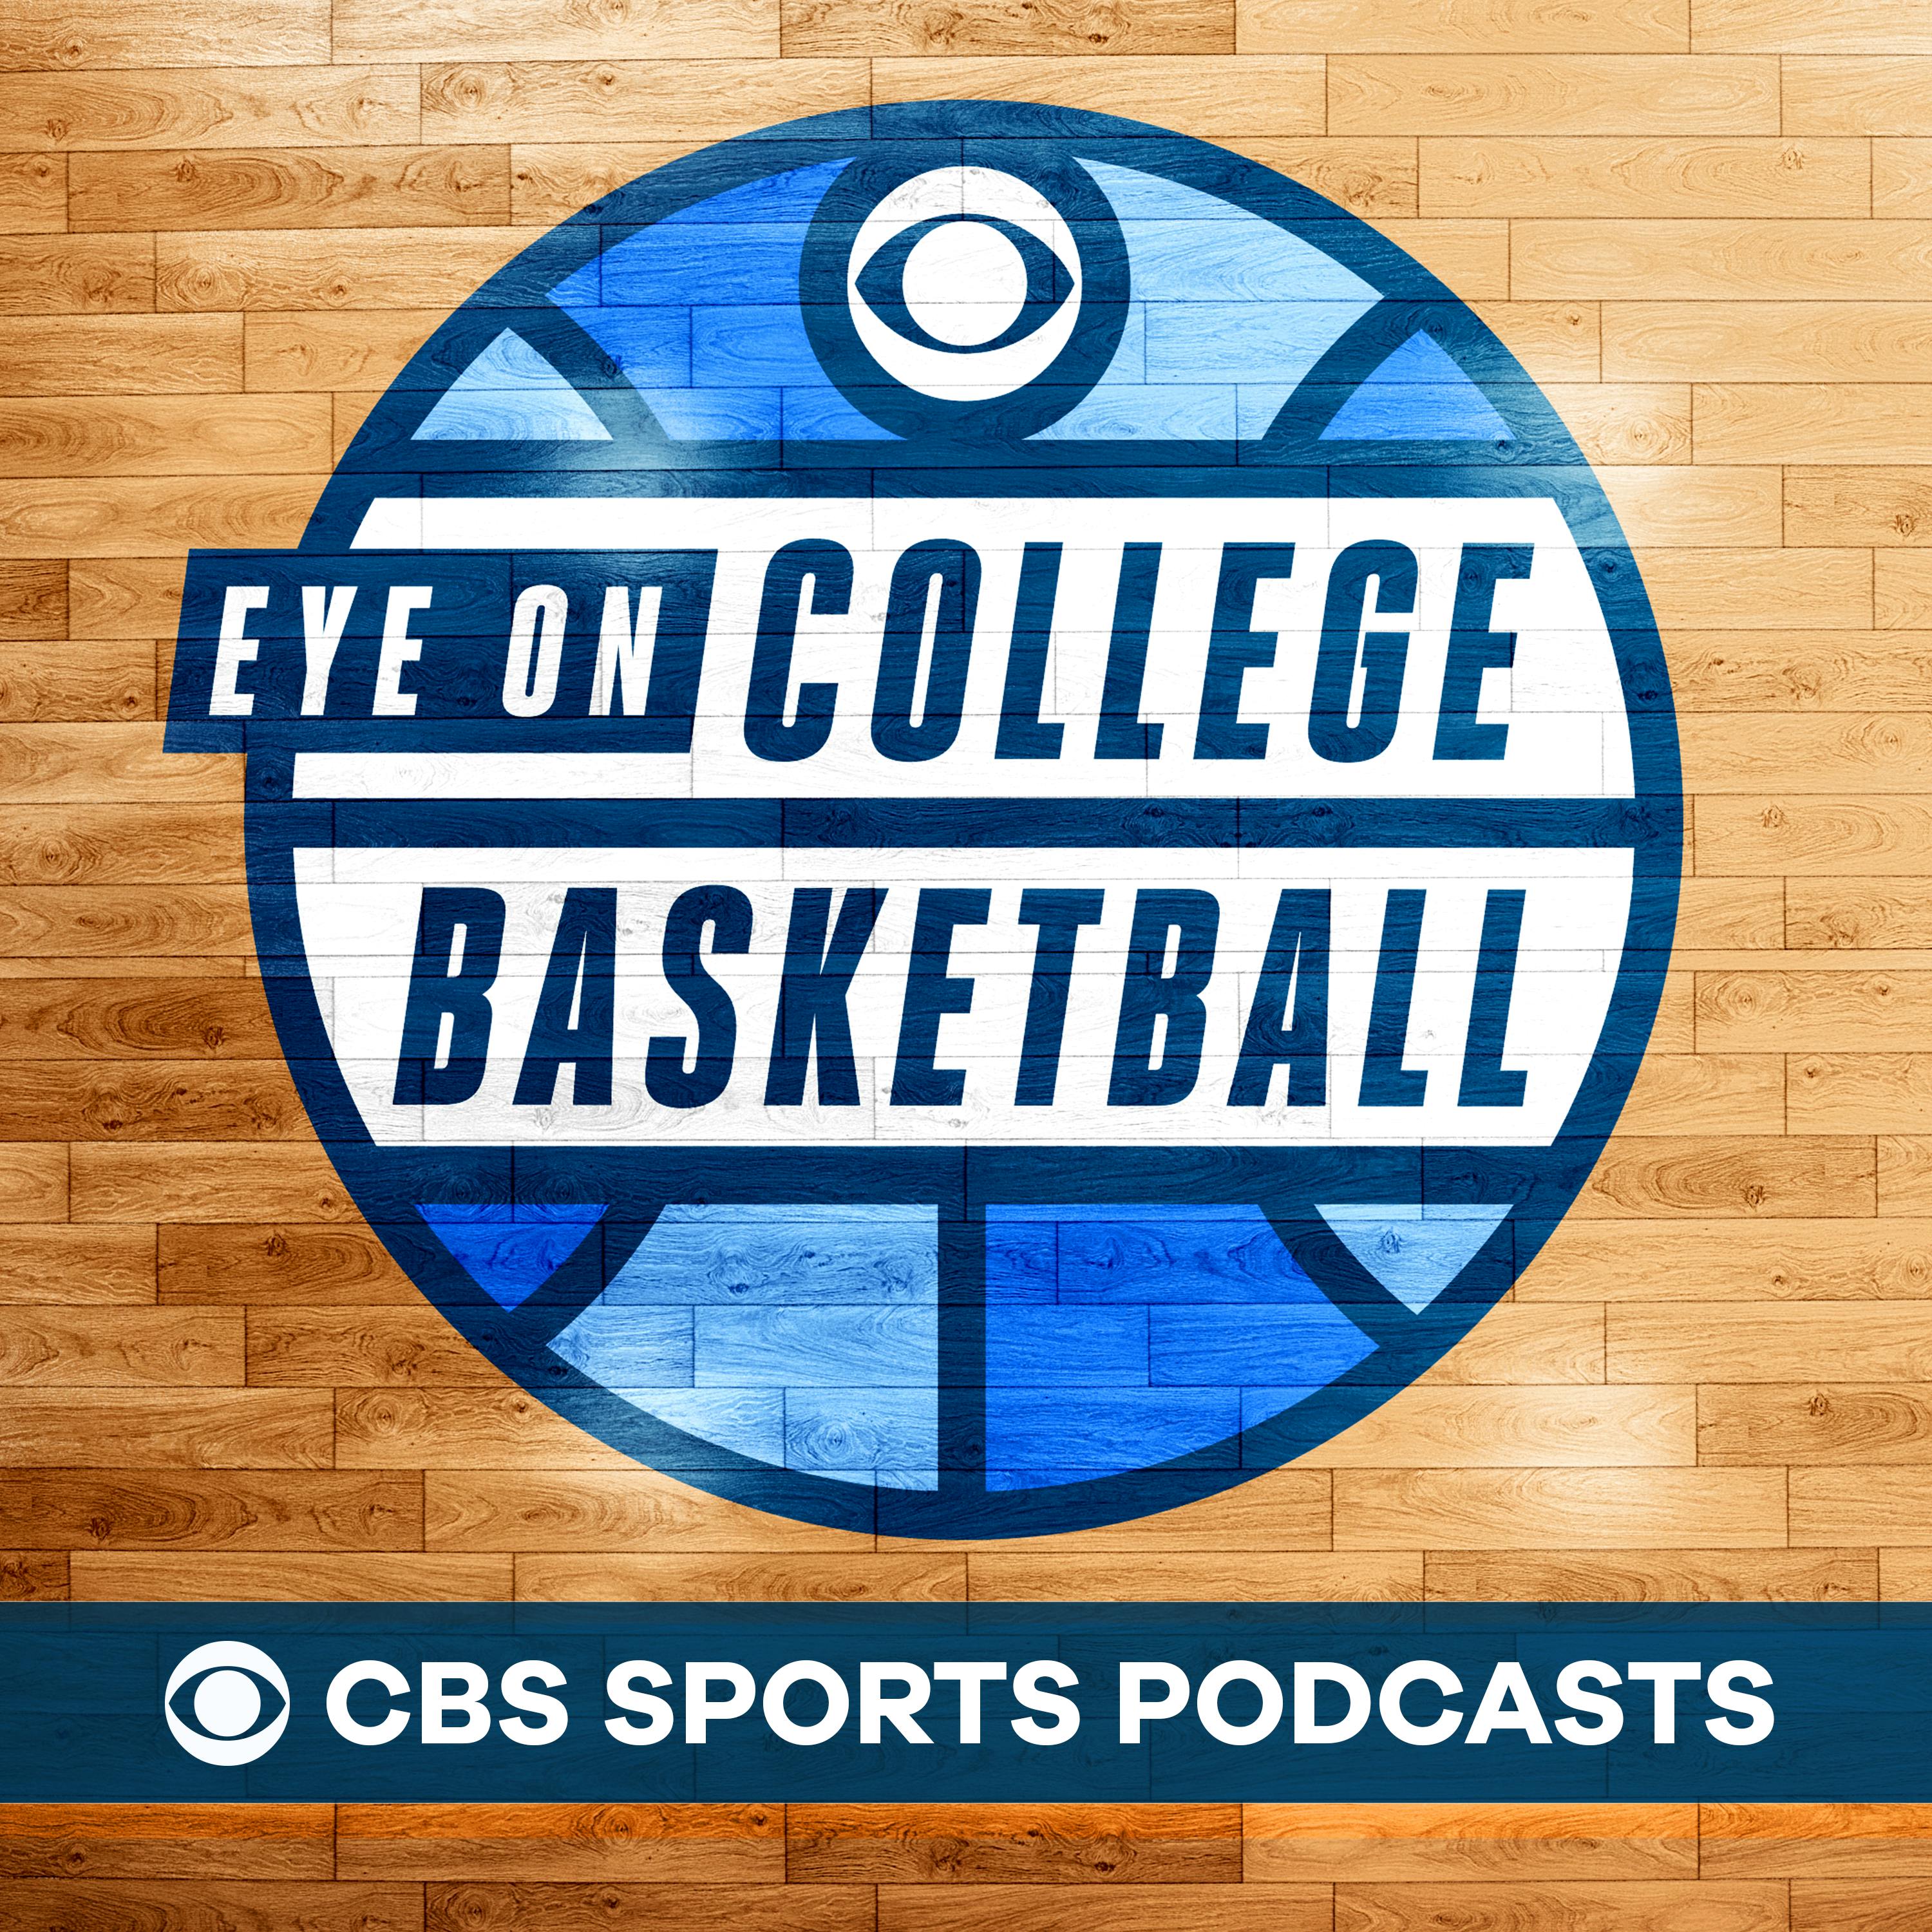 🏀 NCAA Tournament preview spectacular 🔥 Gary Parrish and Matt Norlander pick every game in their brackets - Eye on College Basketball podcast